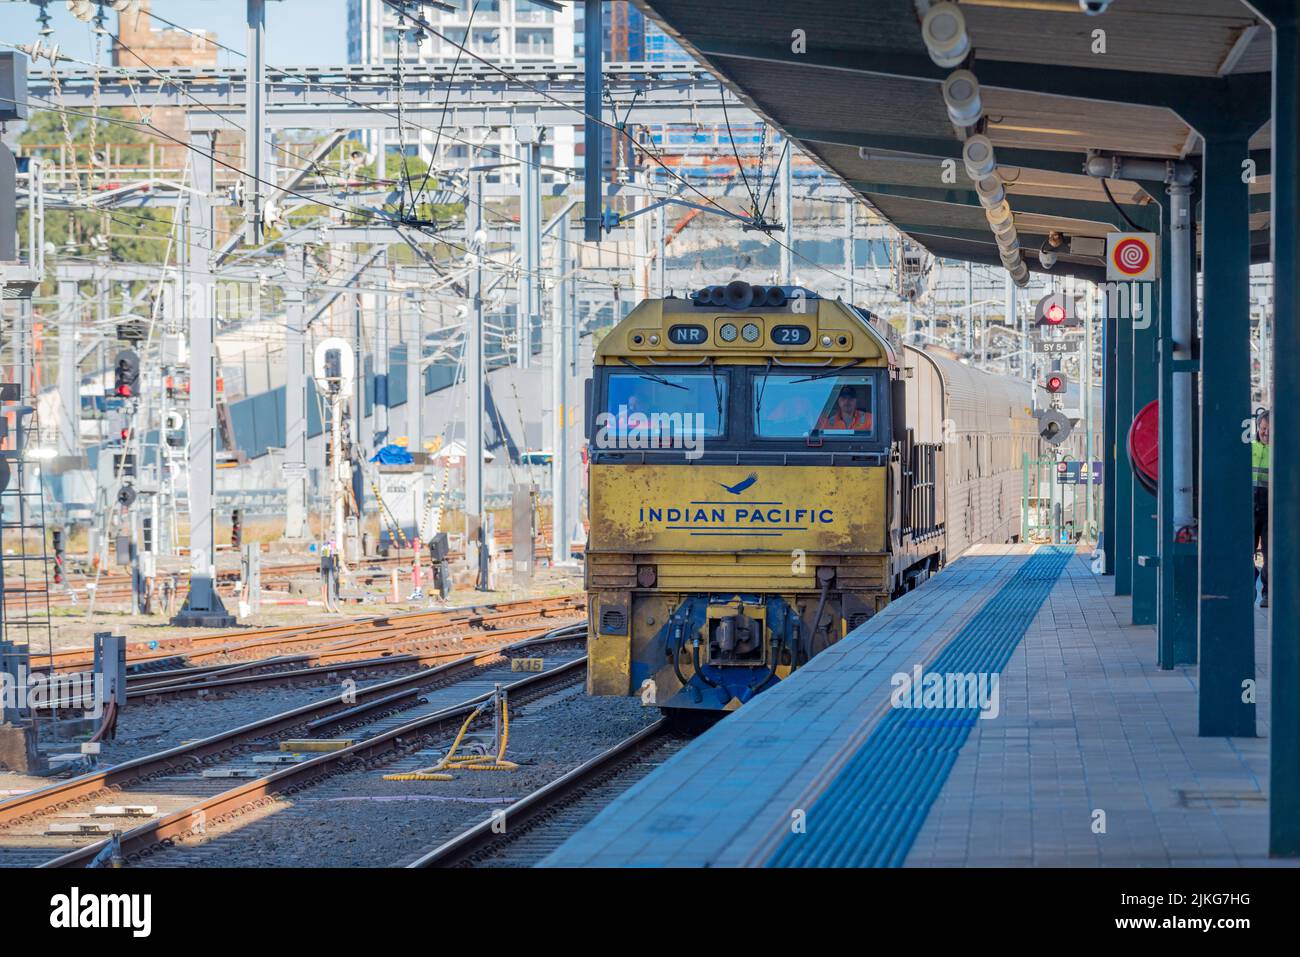 The Indian Pacific train arriving at Central Station in Sydney after travelling 4352 kilometers on its regular journey from Perth, Western Australia Stock Photo